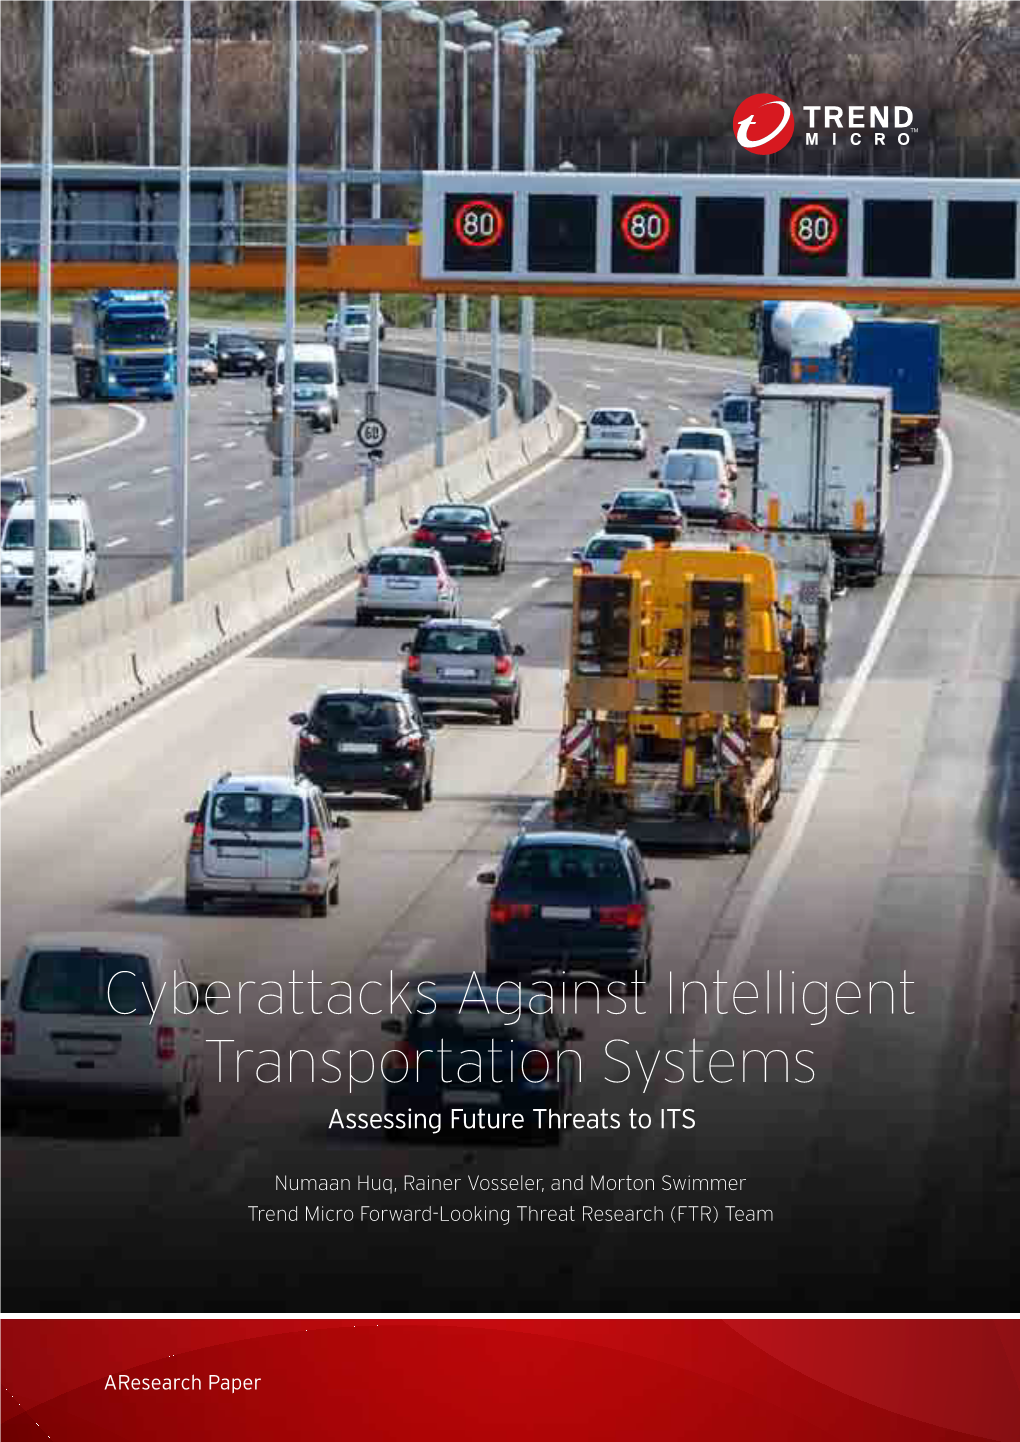 Cyberattacks Against Intelligent Transportation Systems: Assessing